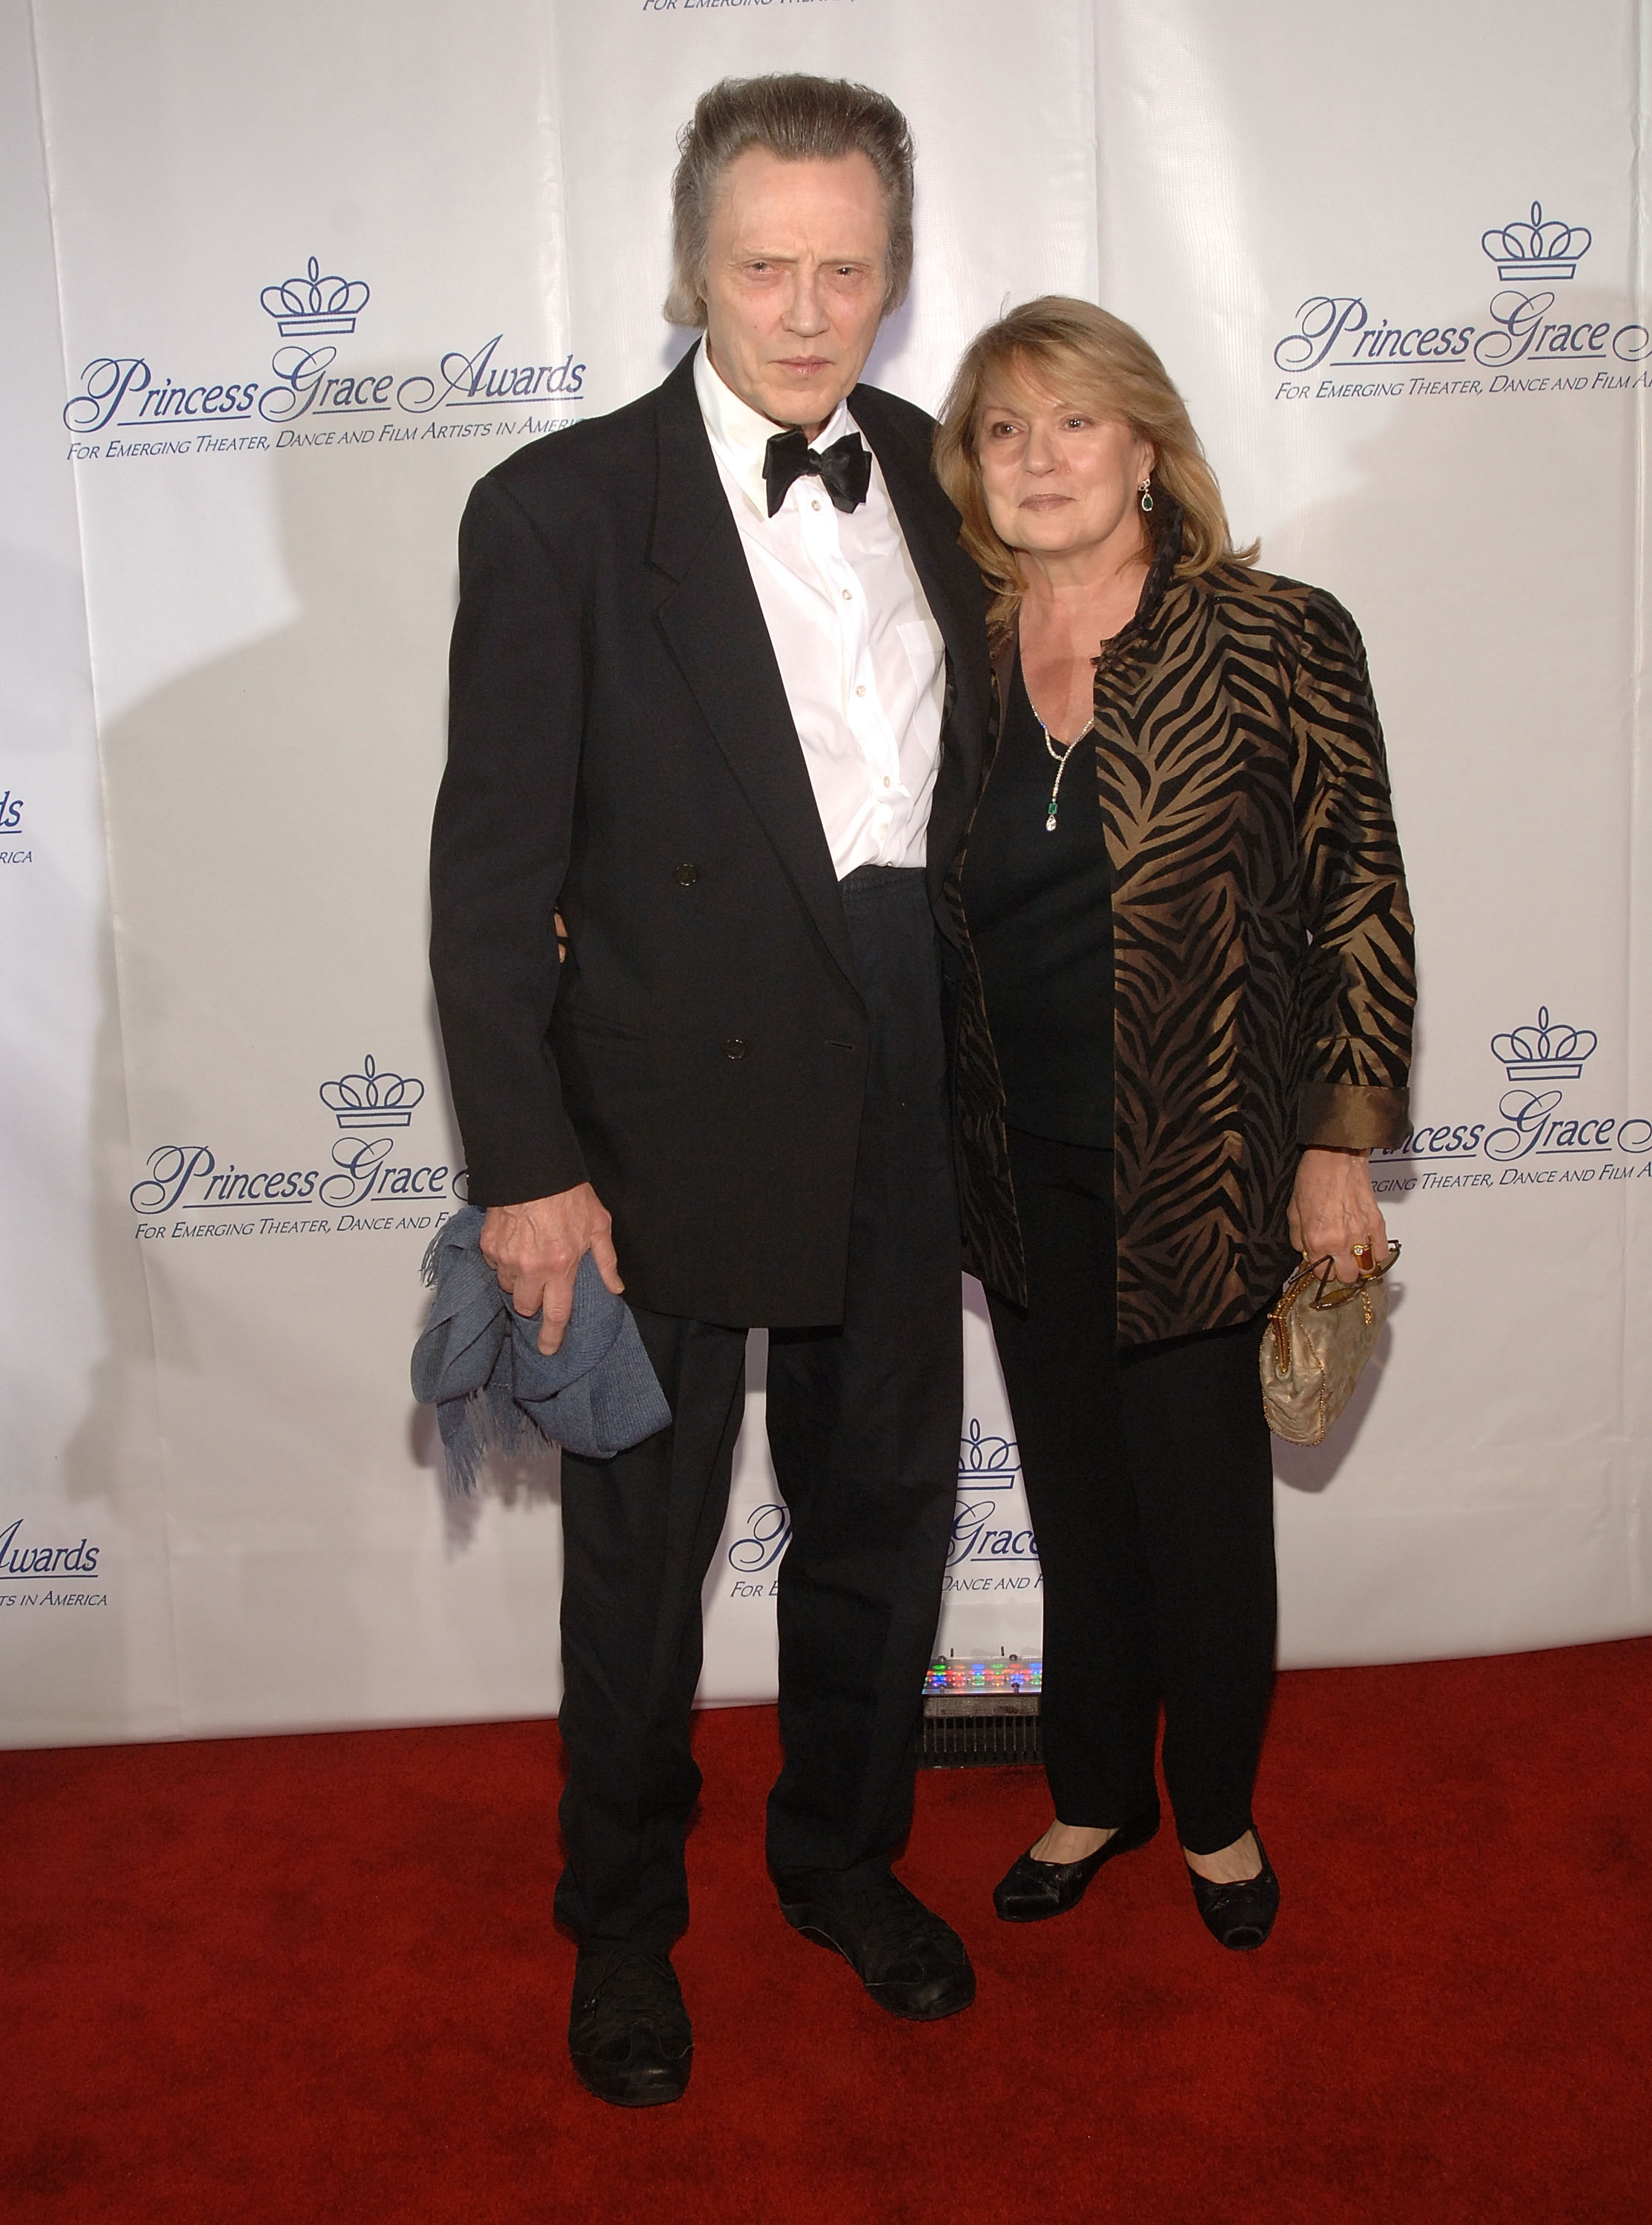 Christopher Walken and his wife Georgianne Walken attend the 2008 Princess Grace awards gala at Cipriani 42nd Street on October 15, 2008, in New York City. | Source: Getty Images